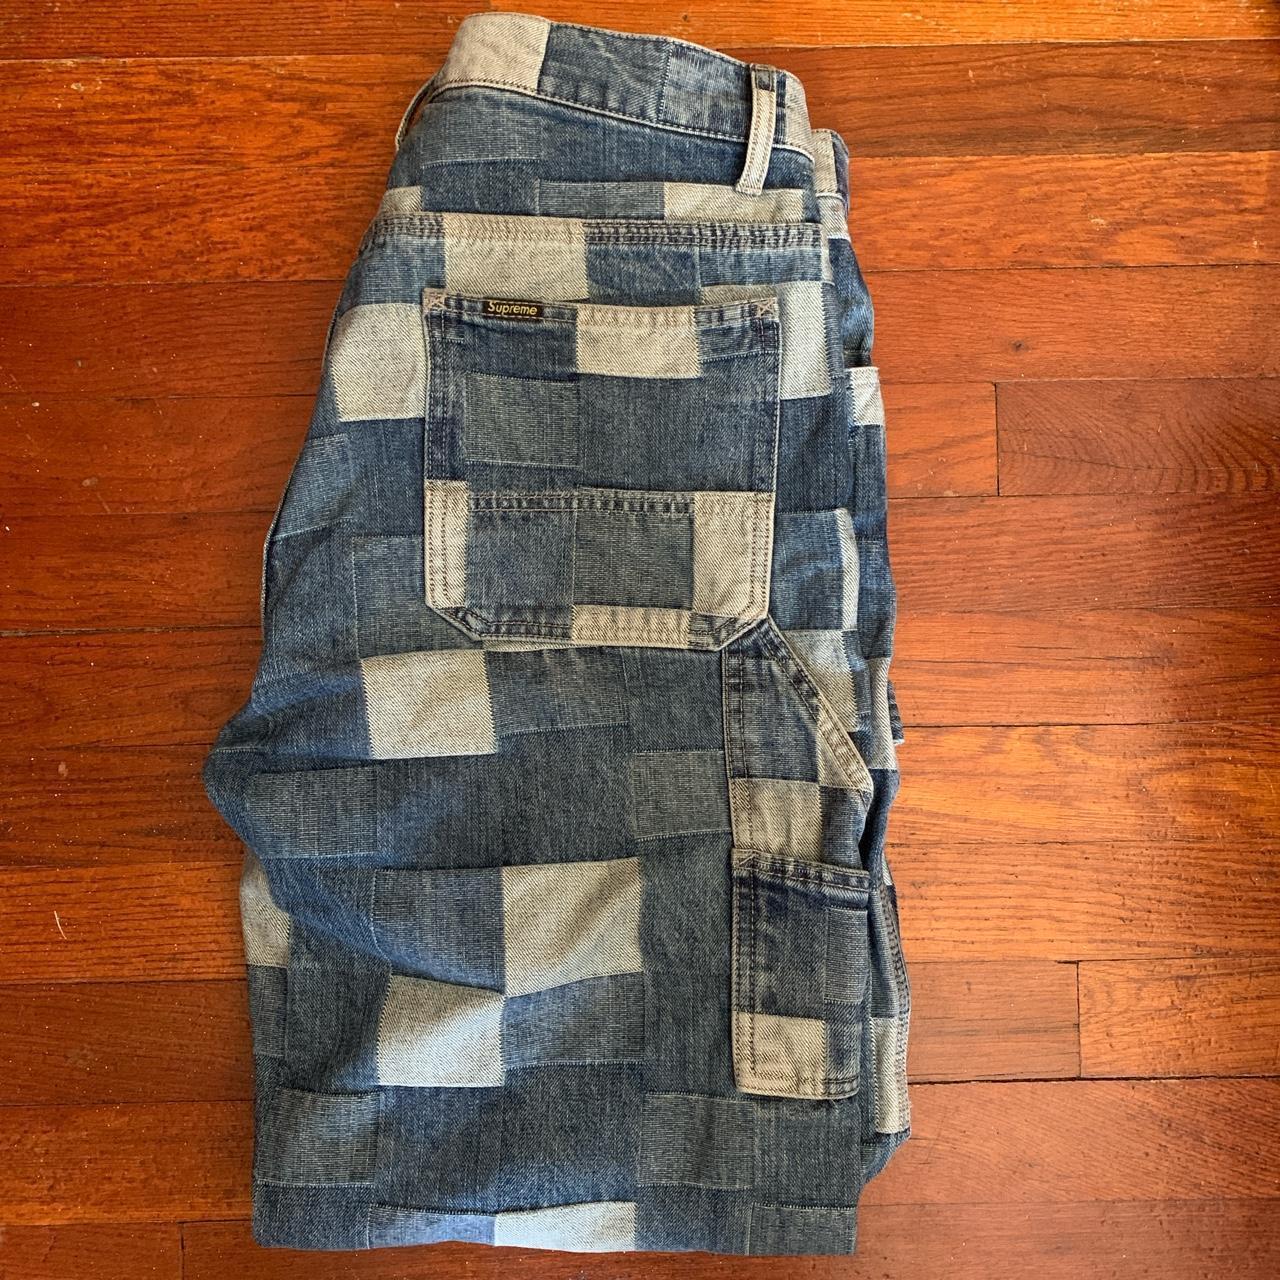 Supreme Patched Denim Painter pant 🔥🔥 , worn 1 time...